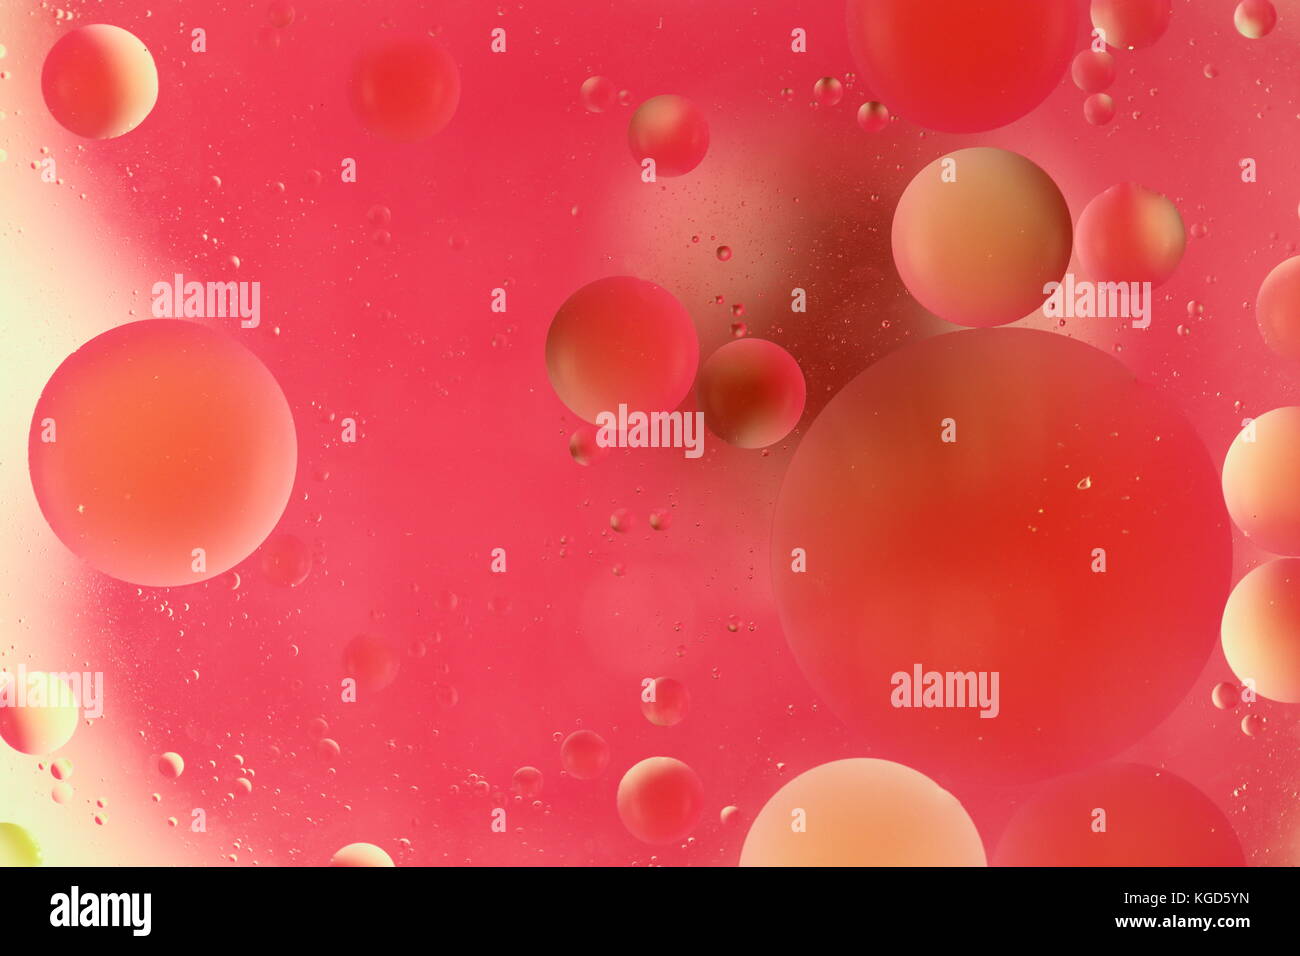 abstract image of oil circles on water Stock Photo